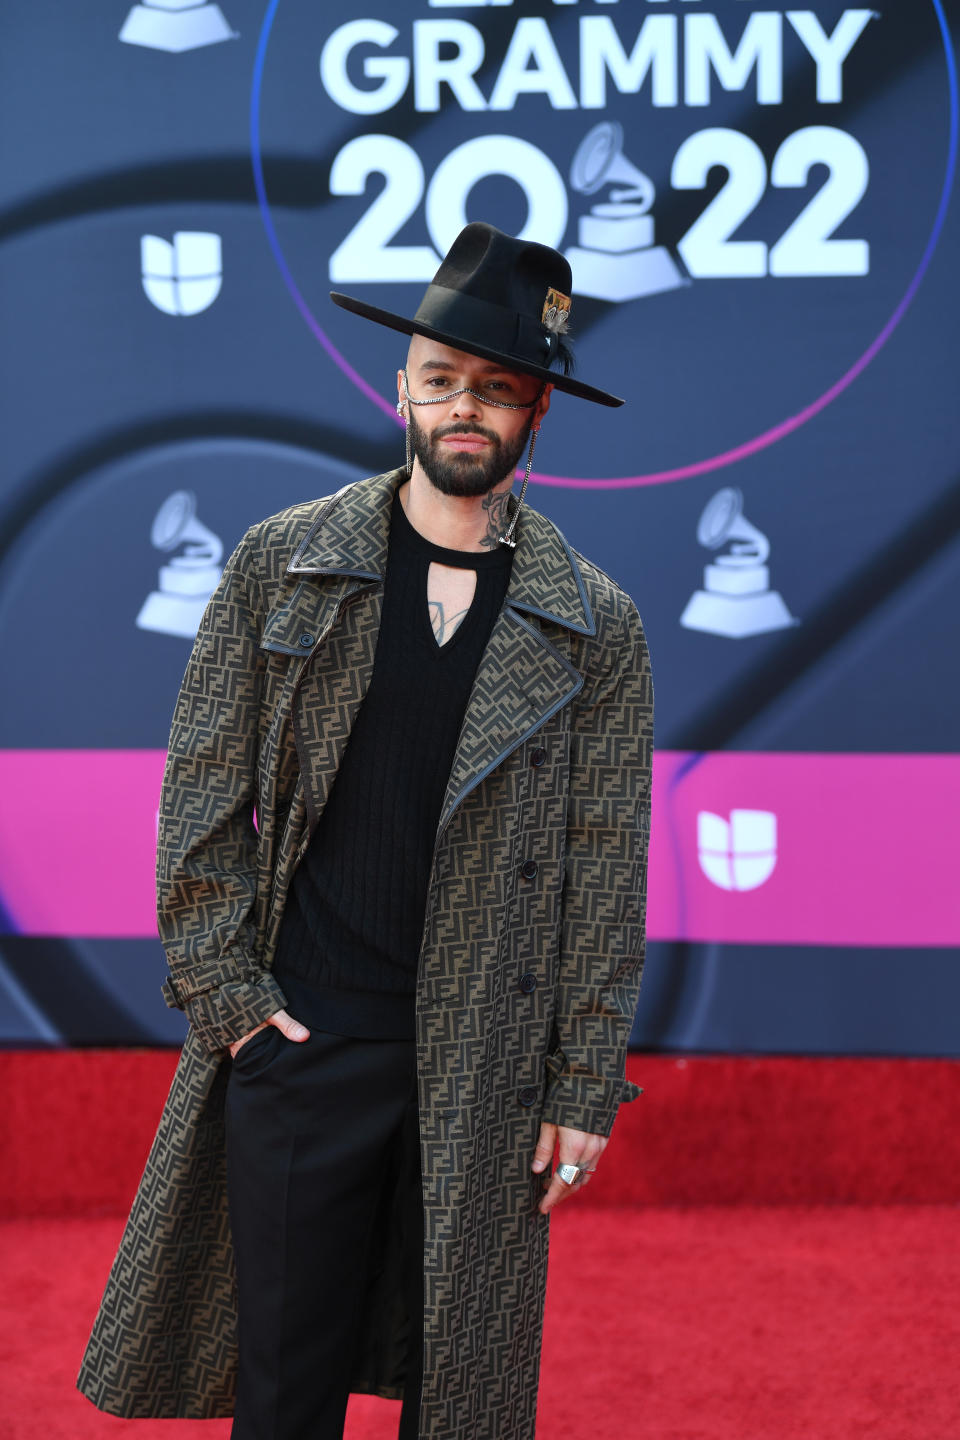 <p>LAS VEGAS, NEVADA - NOVEMBER 17: Jesse Huerta of Jesse y Joy attends The 23rd Annual Latin Grammy Awards at Michelob ULTRA Arena on November 17, 2022 in Las Vegas, Nevada. (Photo by Denise Truscello/Getty Images for The Latin Recording Academy)</p> 